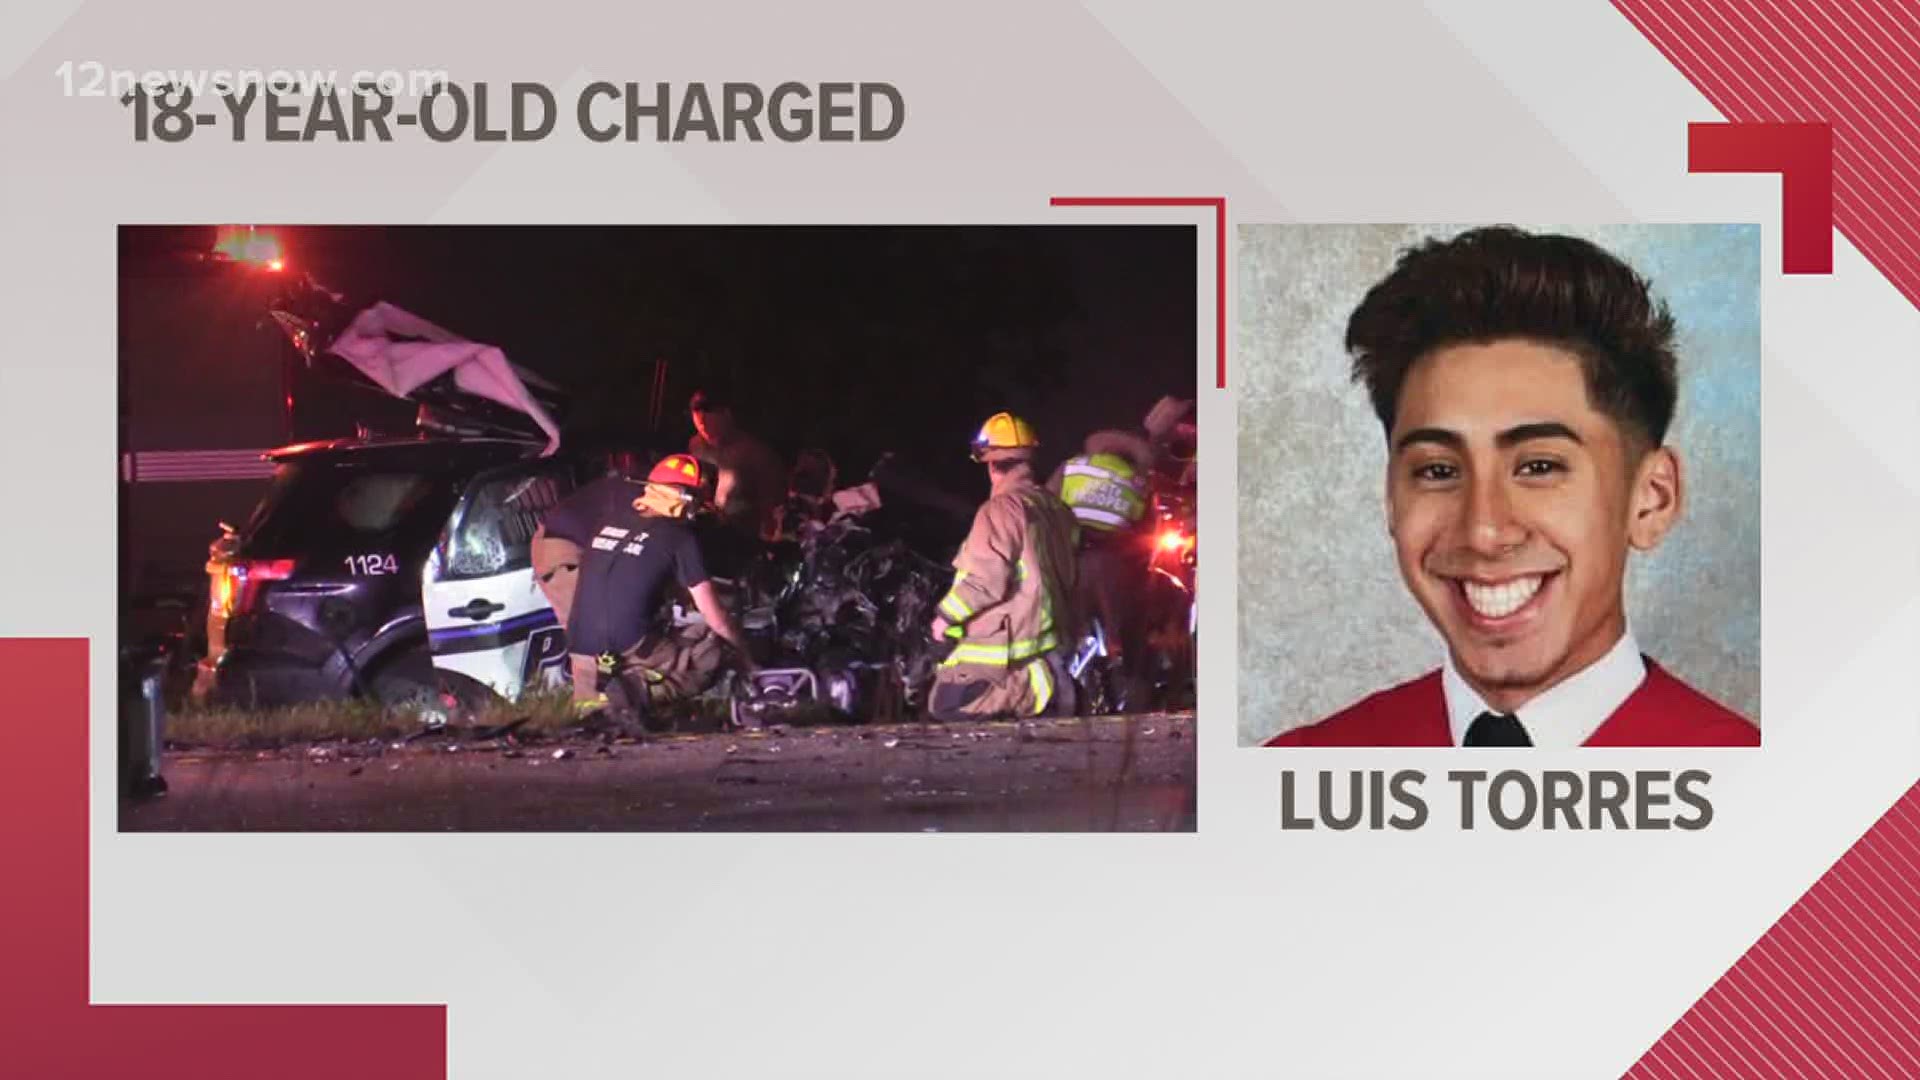 Luis Torres had a blood alcohol content level more than 3 times the legal limit according to a probable cause affidavit